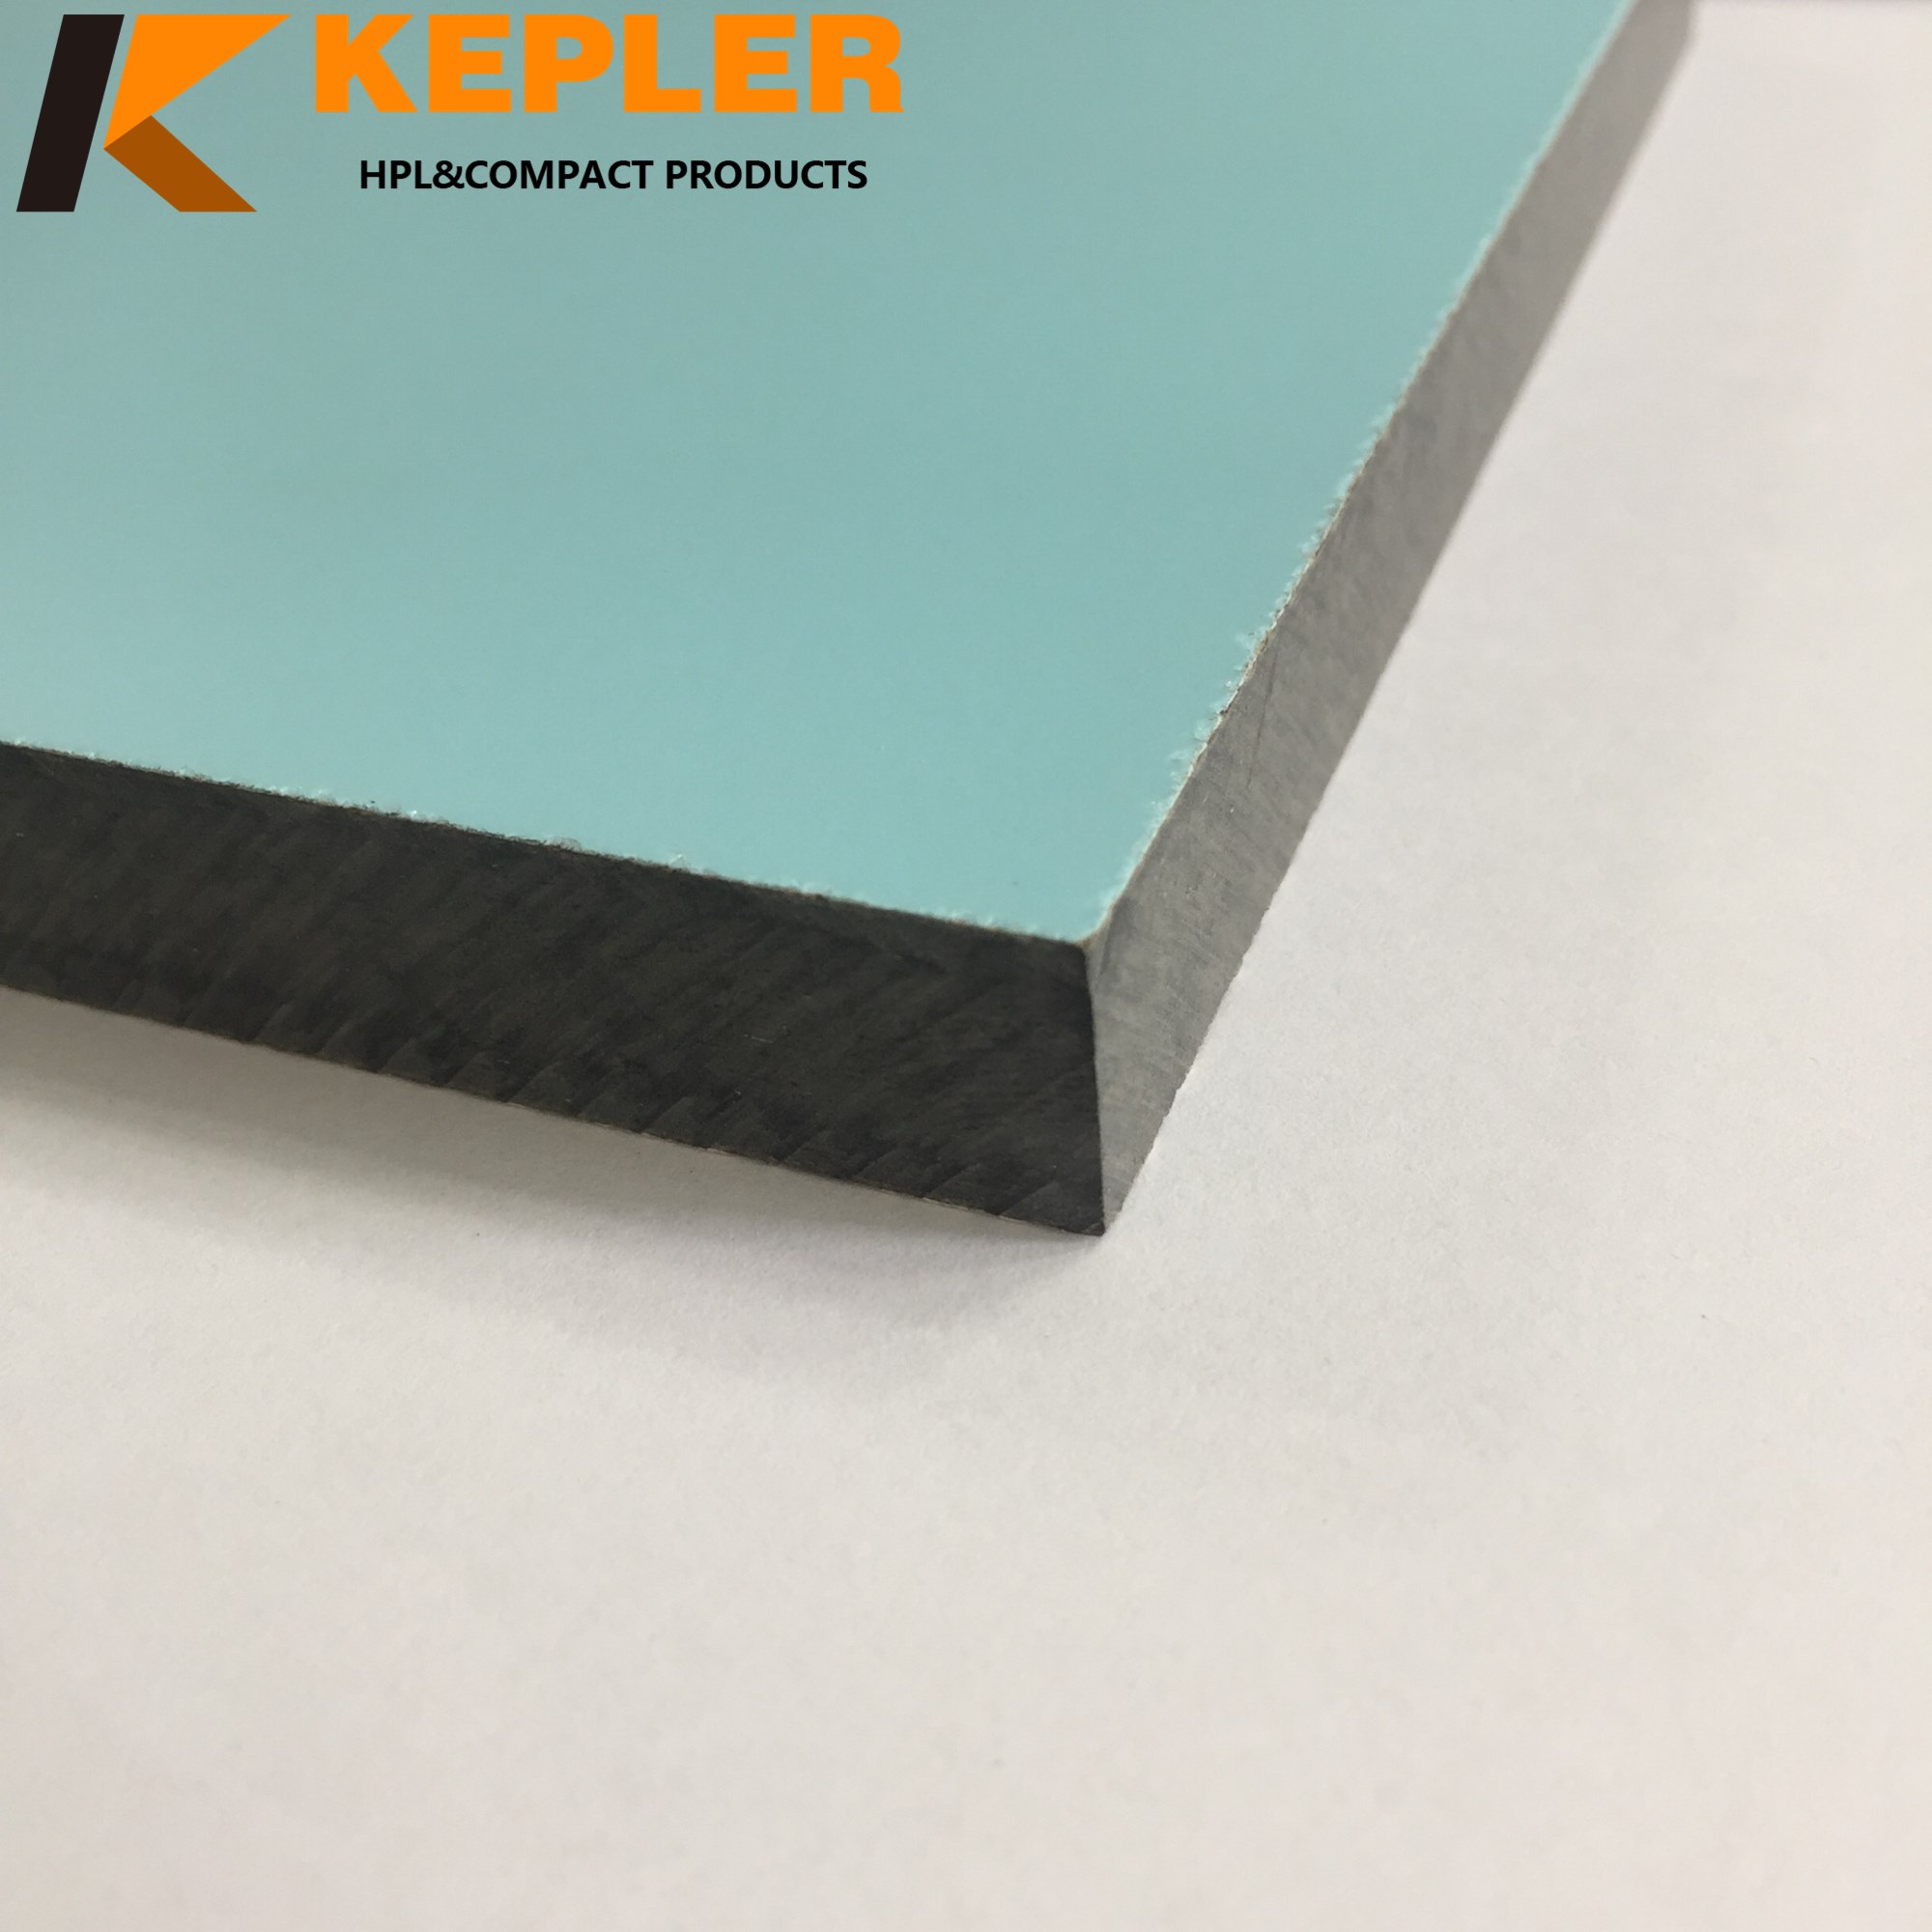 Kepler 15mm thickness scratch-proof clean touch chemical resistant compact hpl laboratory work table top panel manufacturer